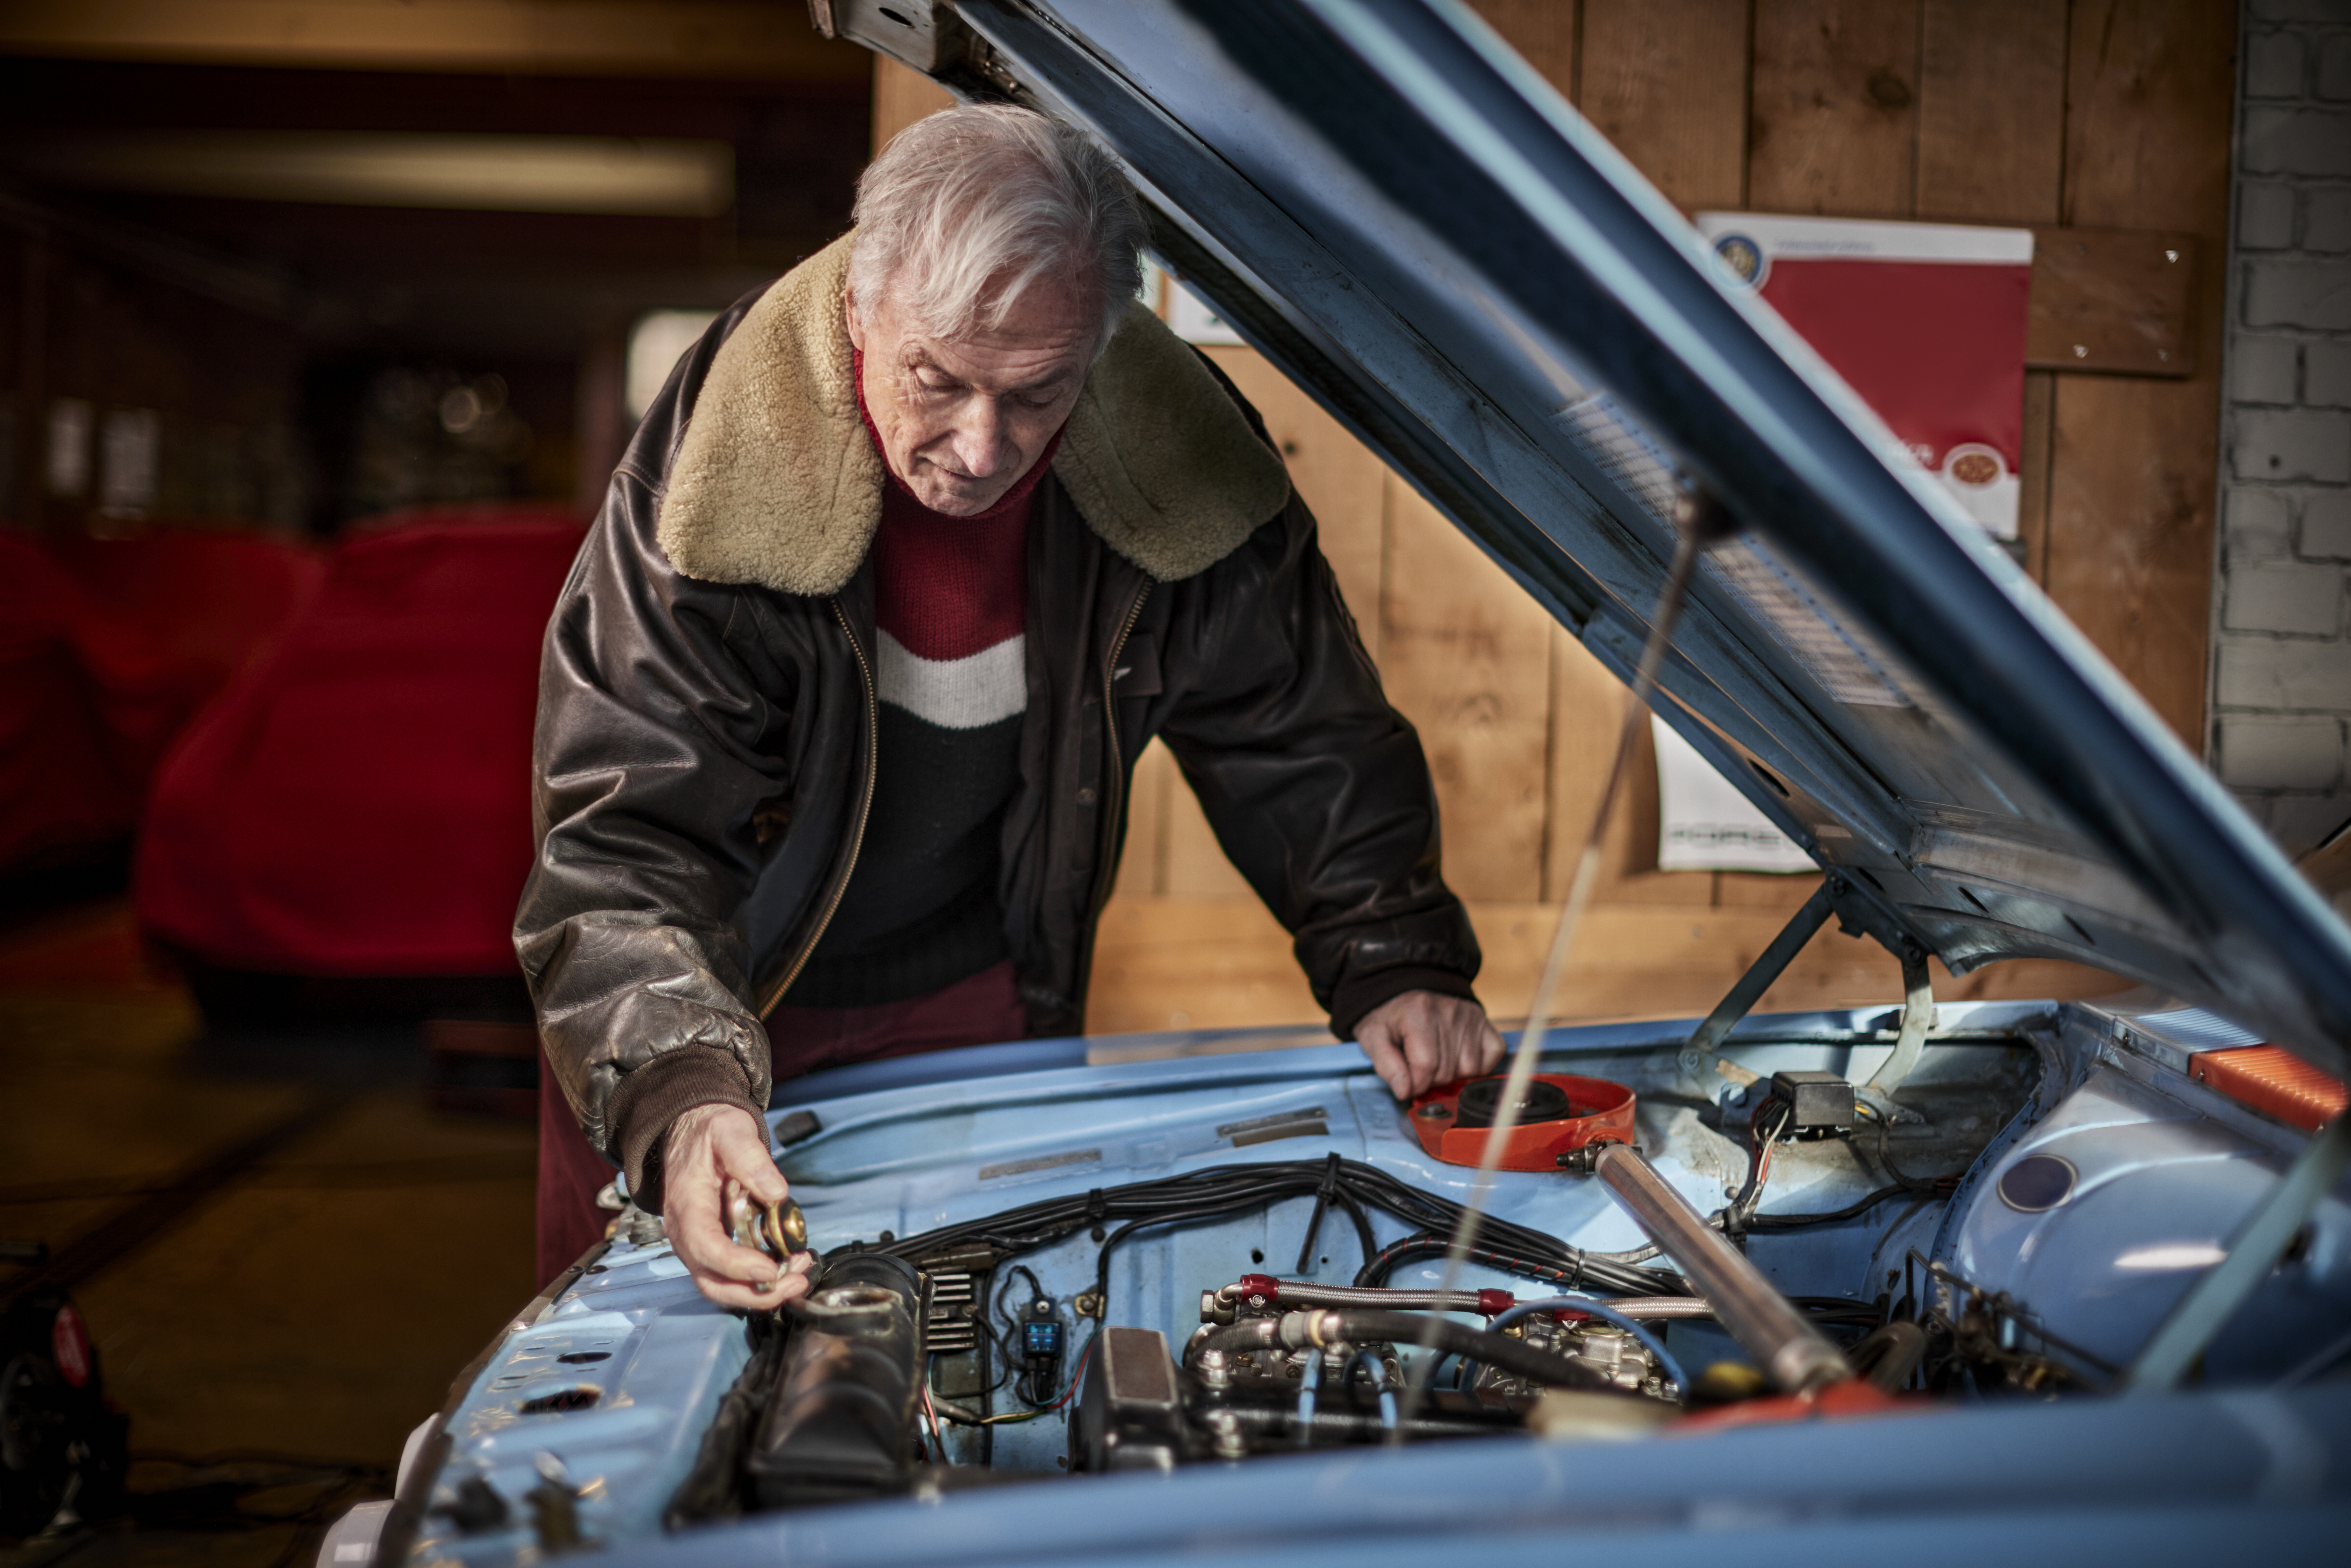 Learning from others can be a great way to get to know your vehicle better - and could be crucial before making any repairs or tweaks